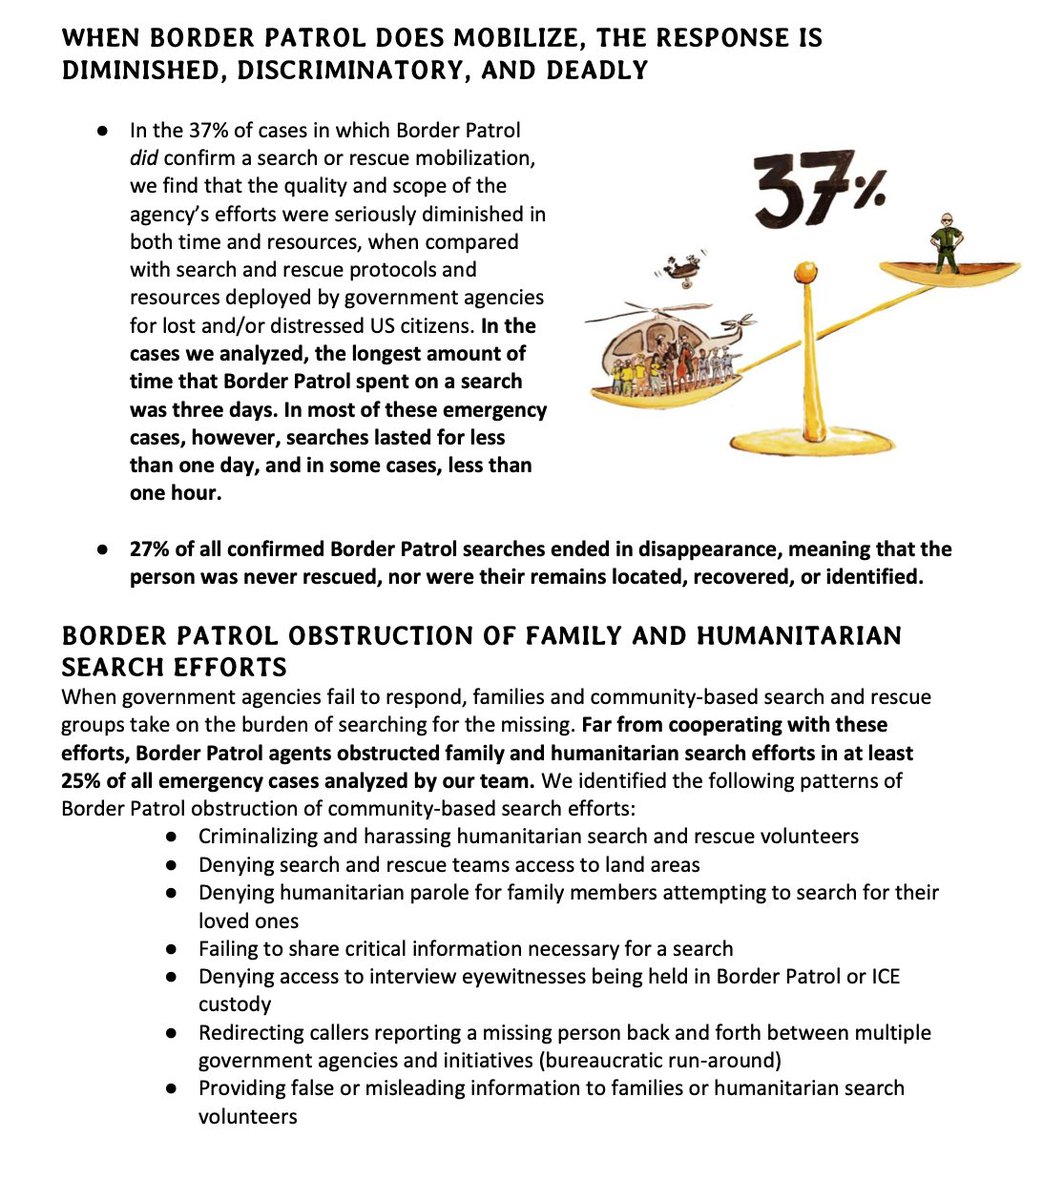 Left To Die: Border Patrol, Search & Rescue and the Crisis of Disappearance is out now. Read the executive summary in the images below.(or here:  https://rb.gy/uzelc1 )And the full report at  http://thedisappearedreport.org 